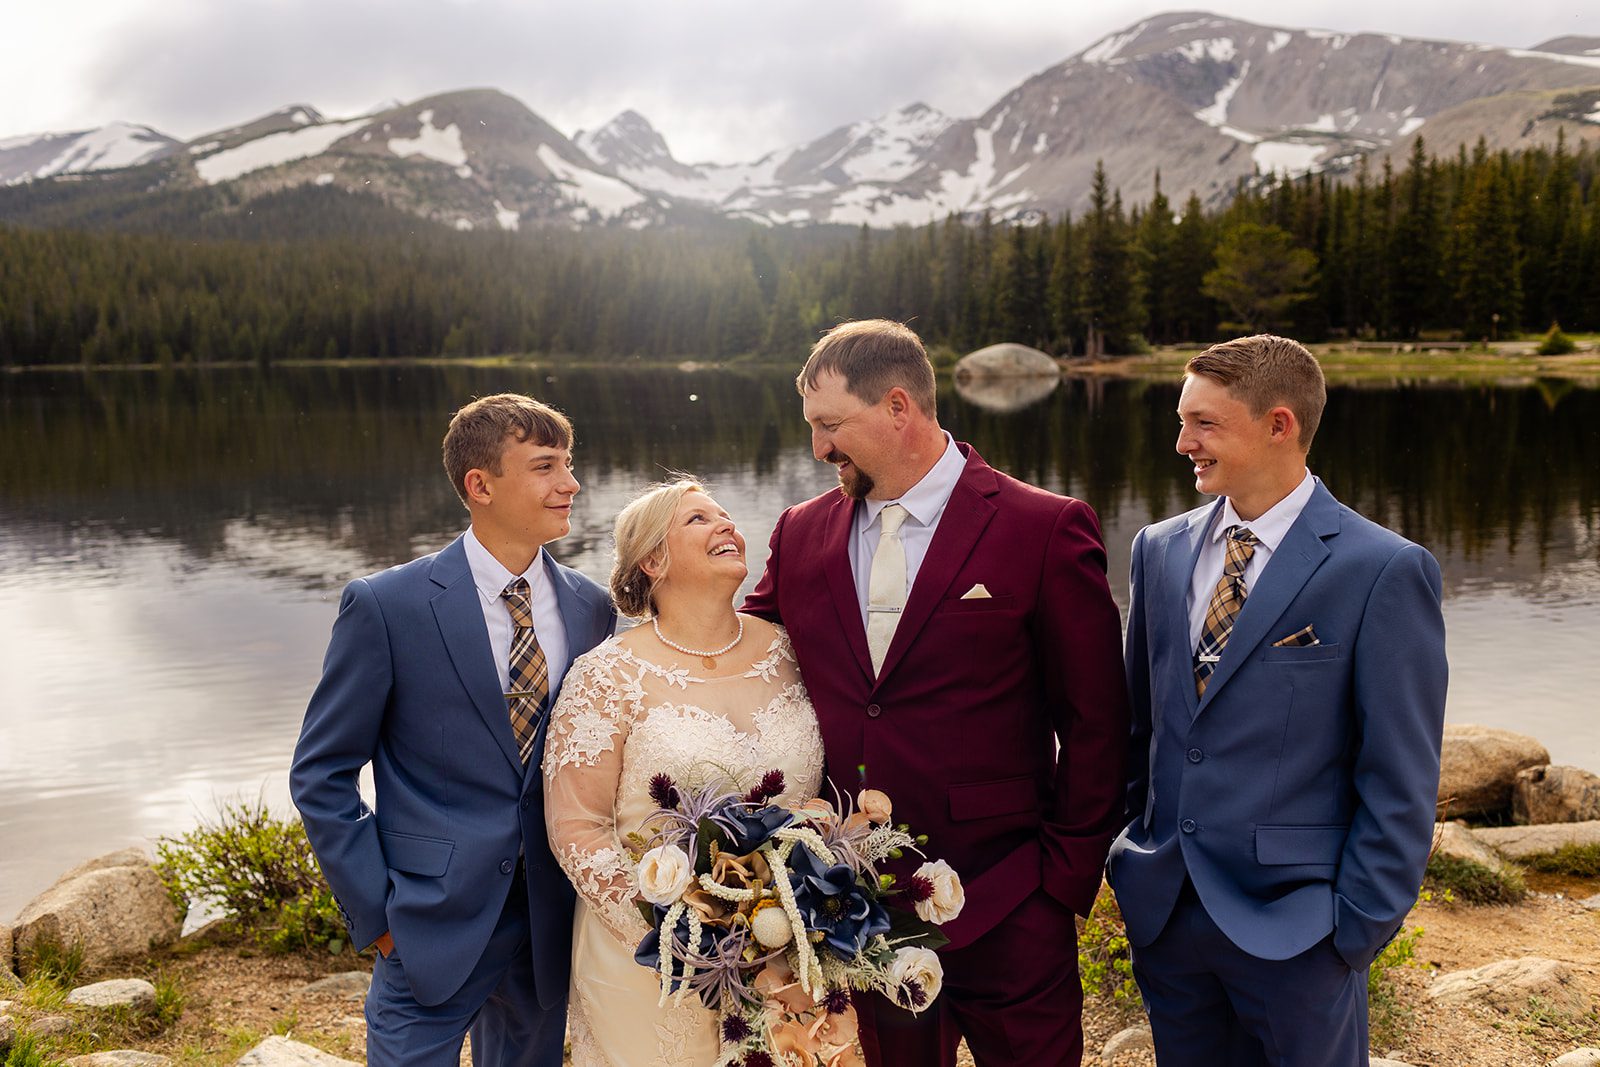 bride and groom with their sons after their wedding at Brainard Lake.